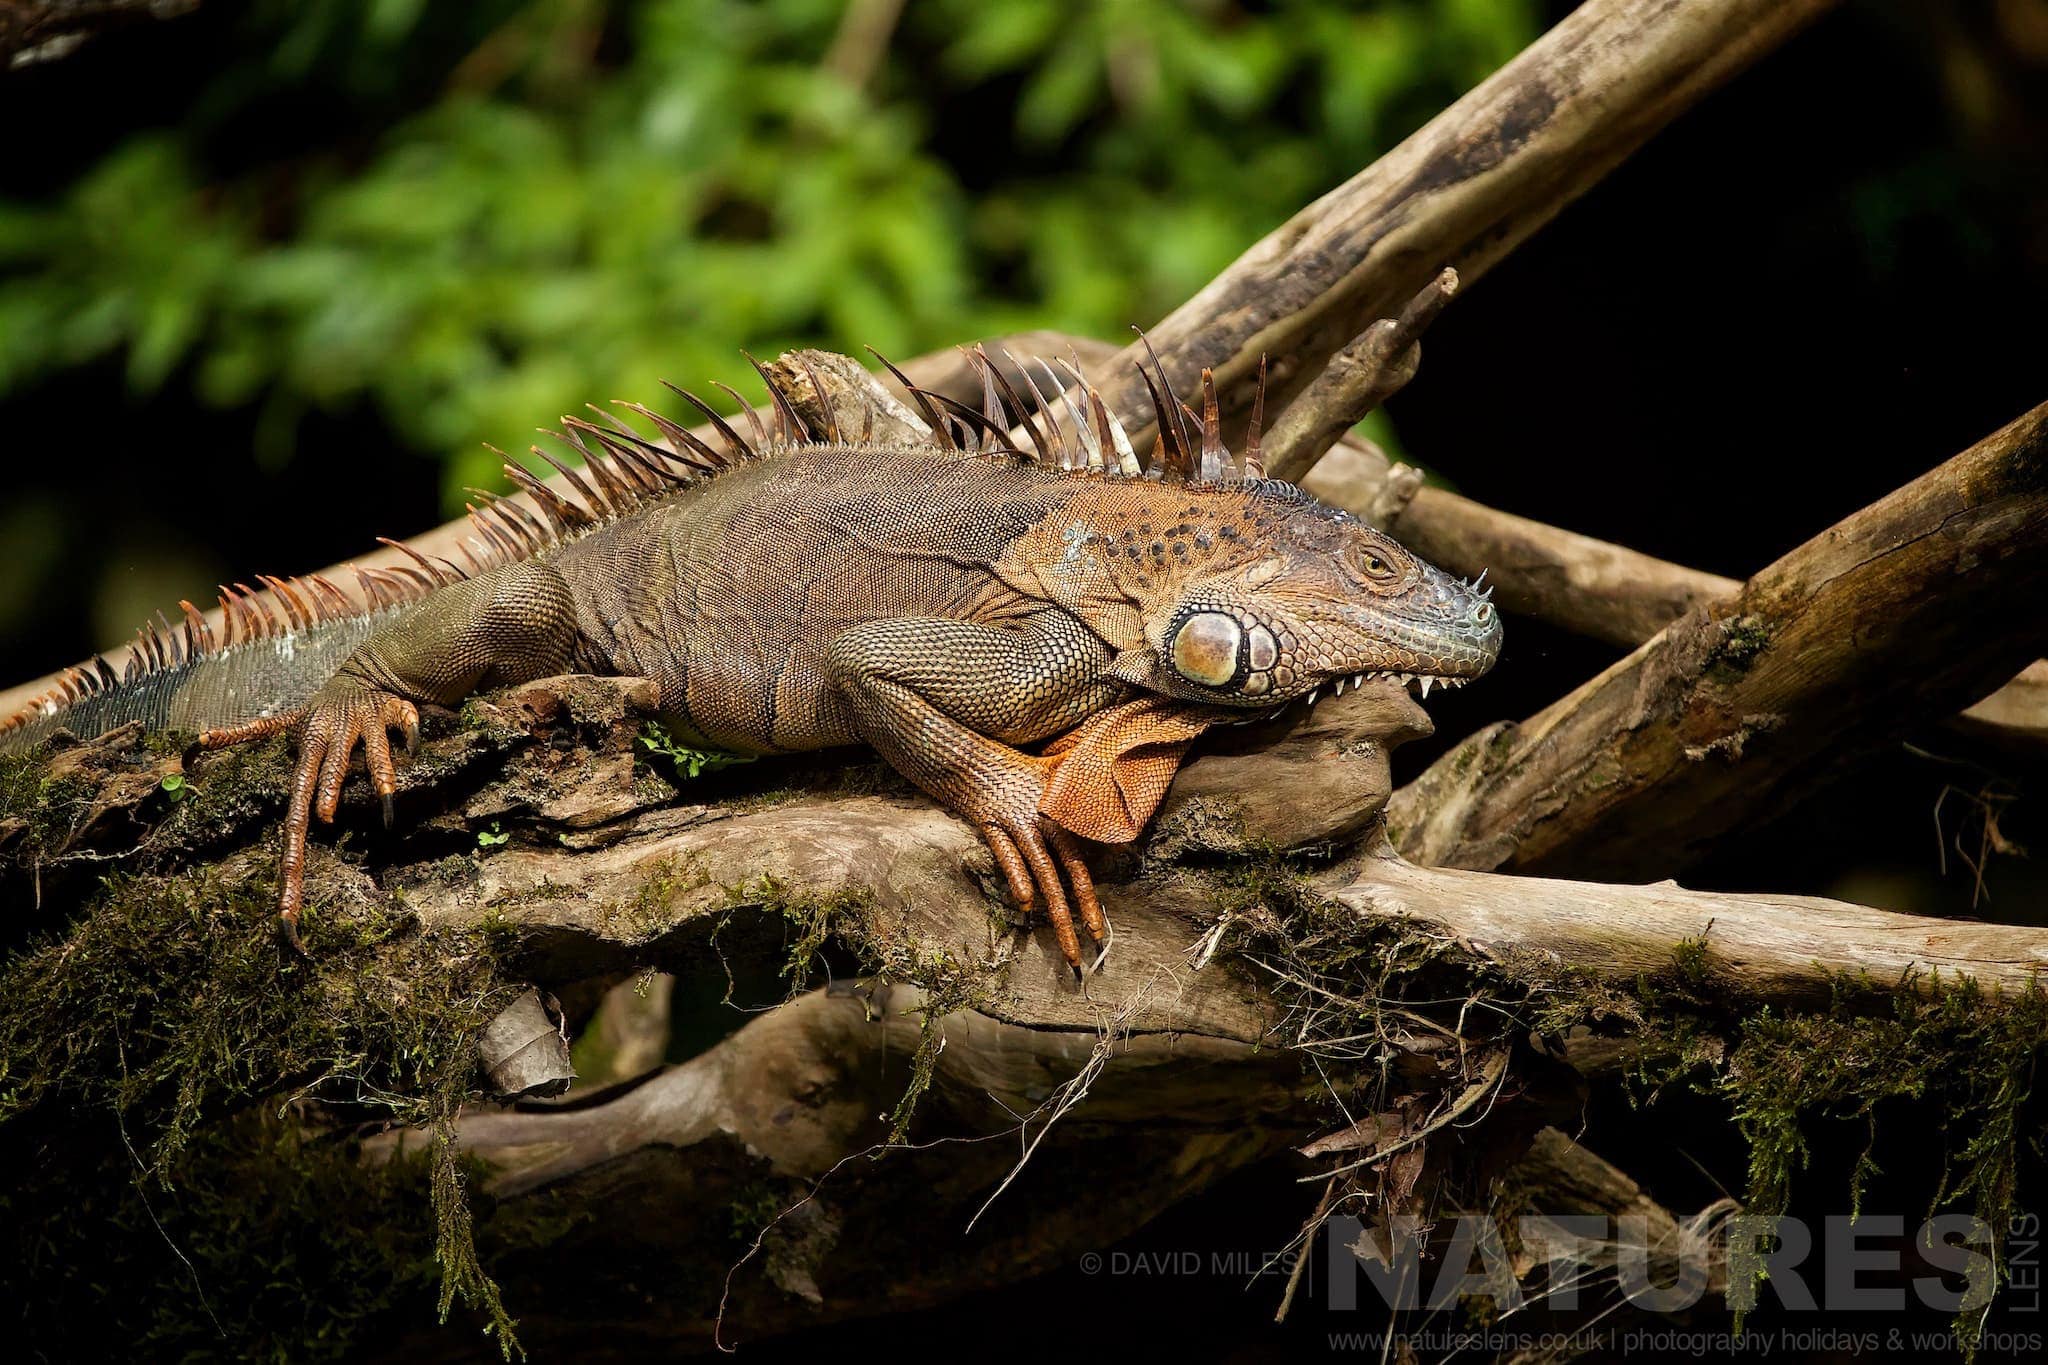 A Basilisk In Its Environment Typical Of The Kind Of Image We Hope You Will Capture During Our Costa Rican Wildlife Photography Holiday